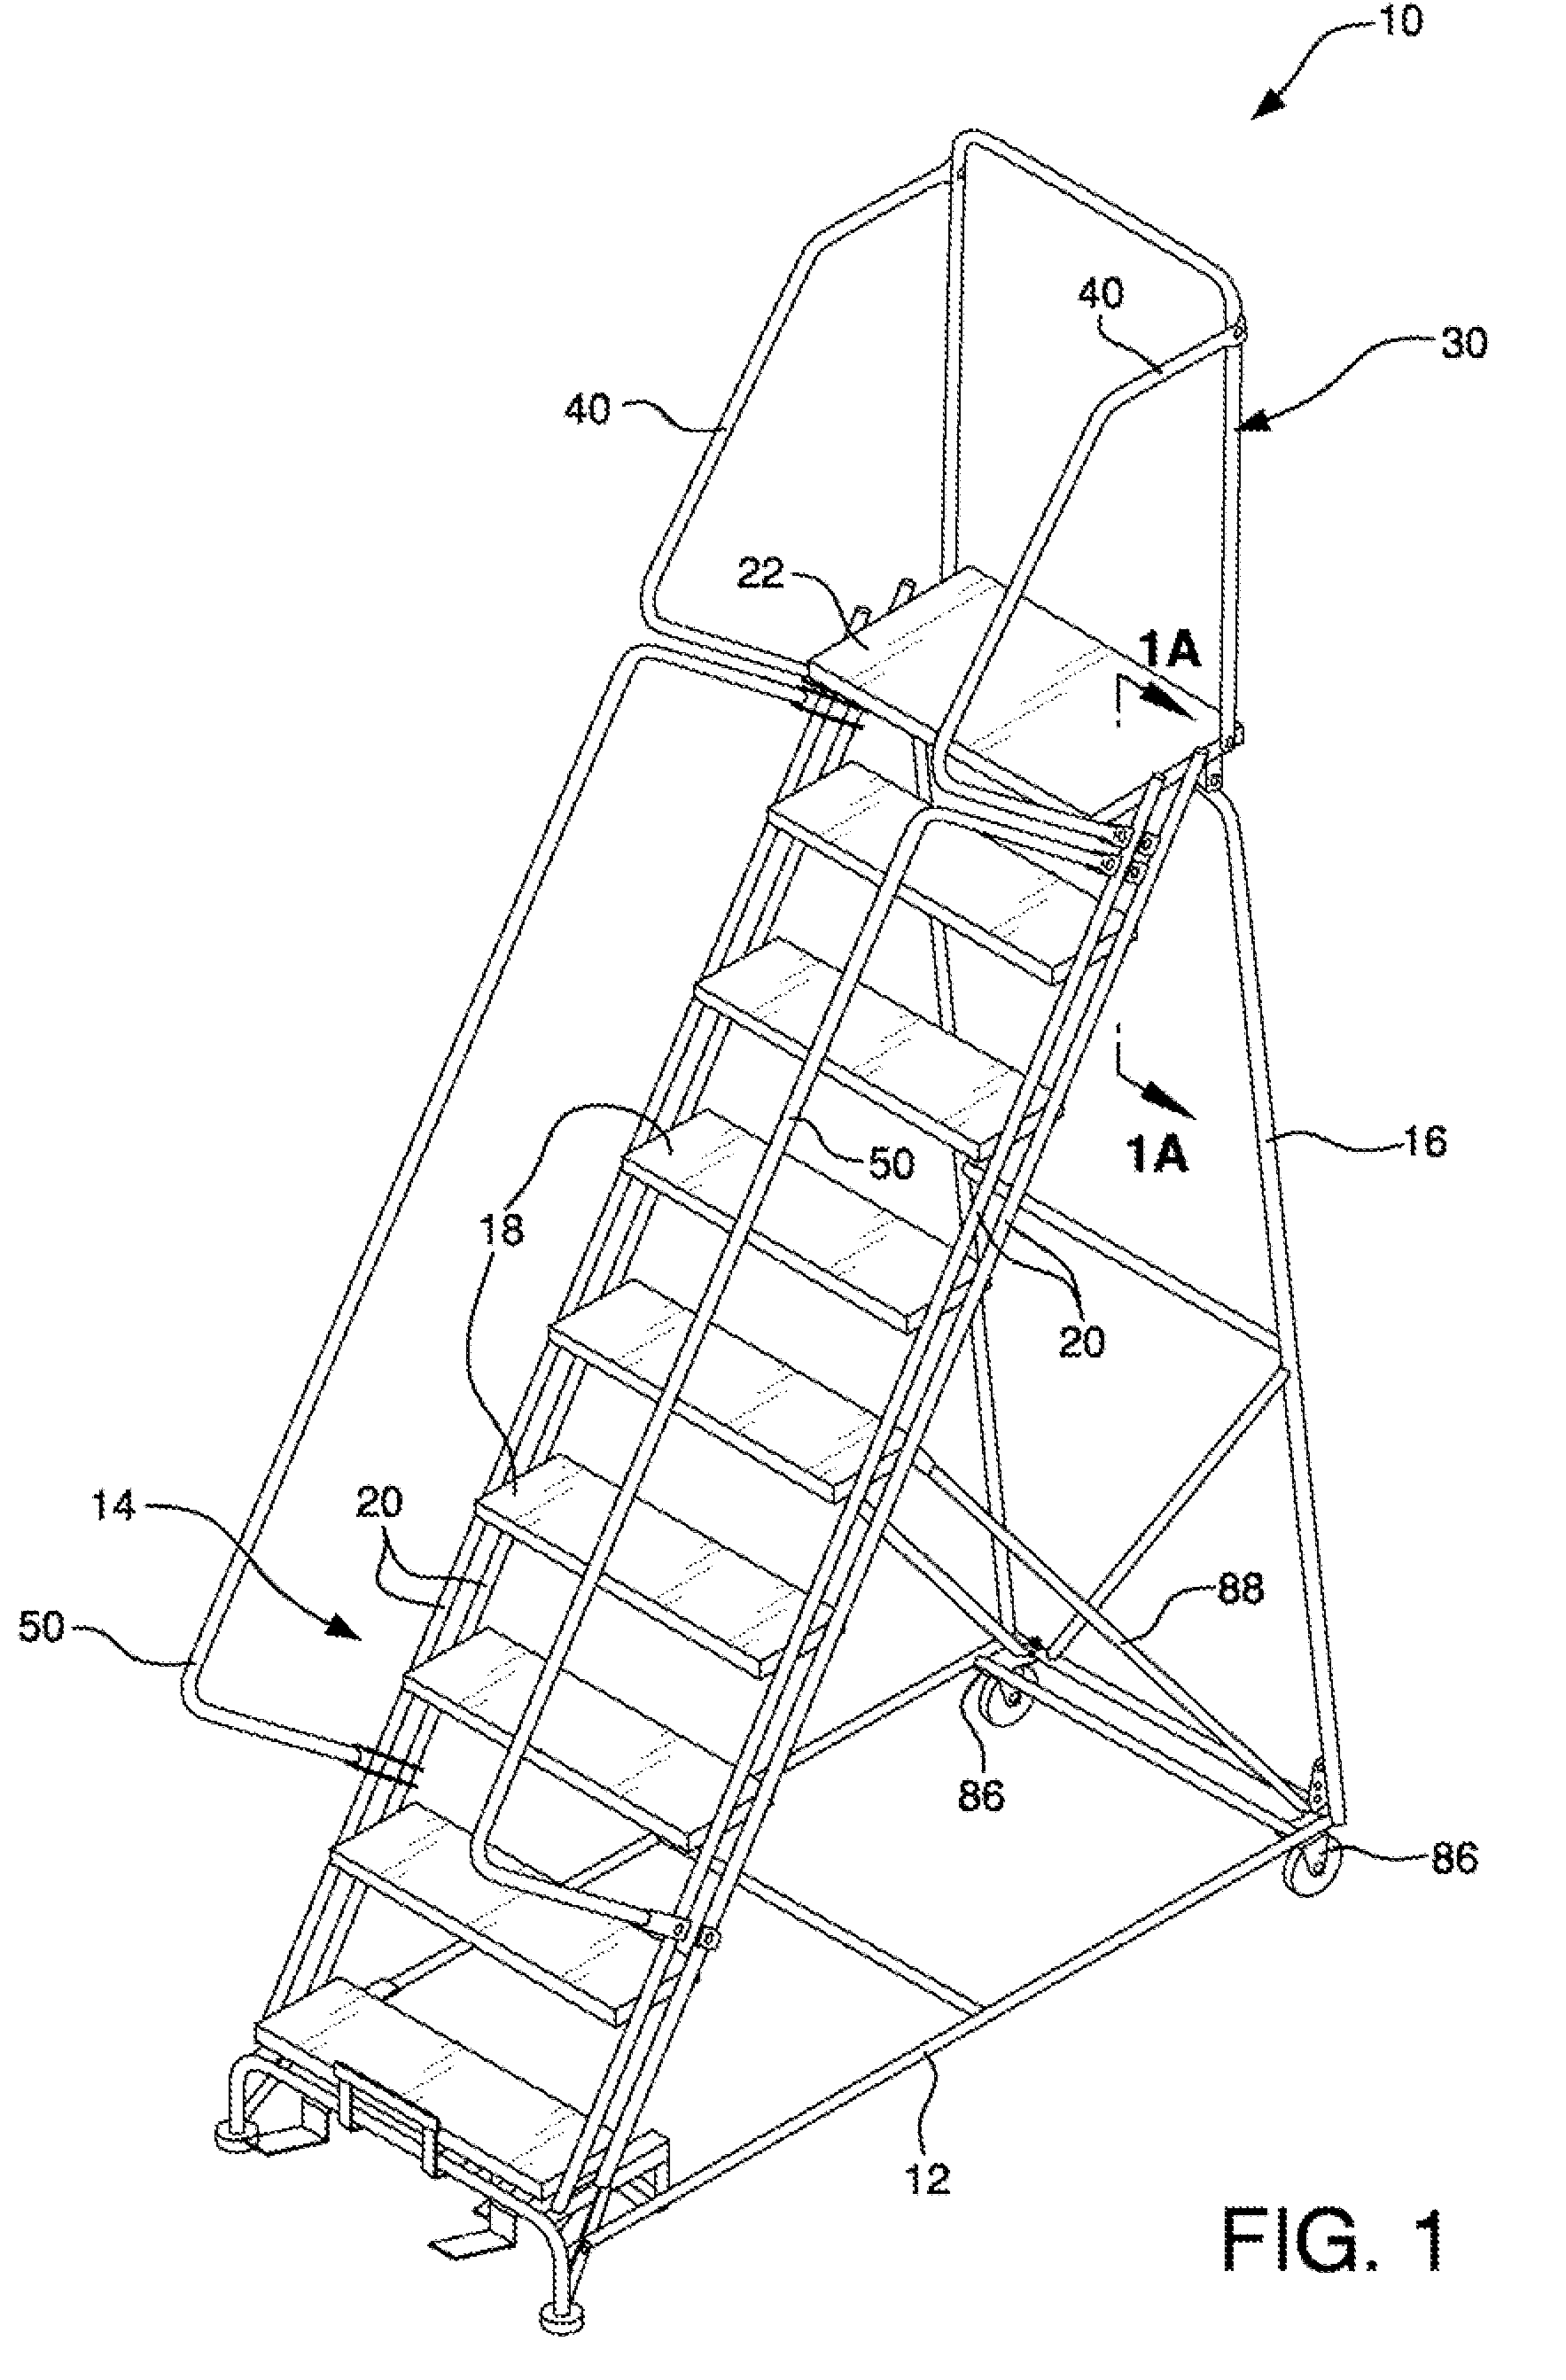 Ladder with removable step and method of storing the ladder in a compact container